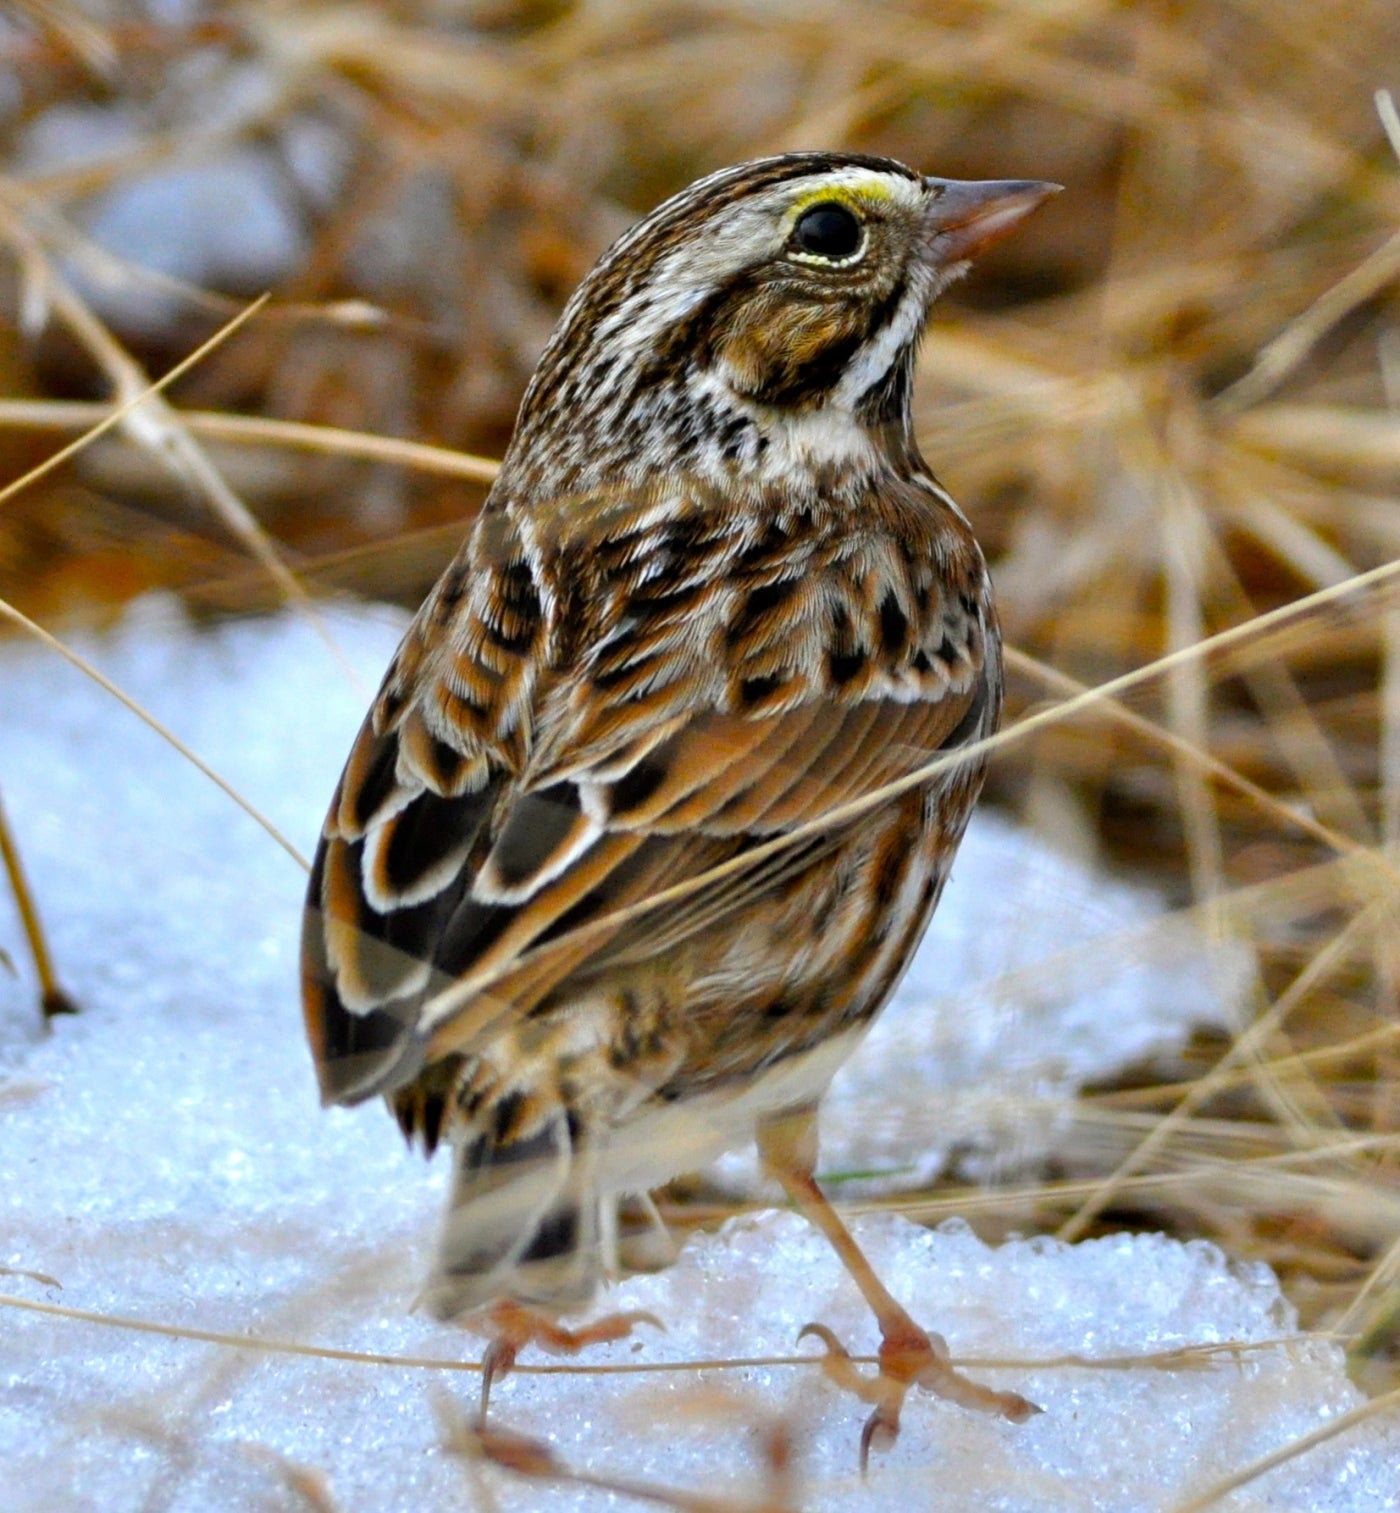 A savannah sparrow stands on a melting patch of snow in a warm-season grass field in Virginia